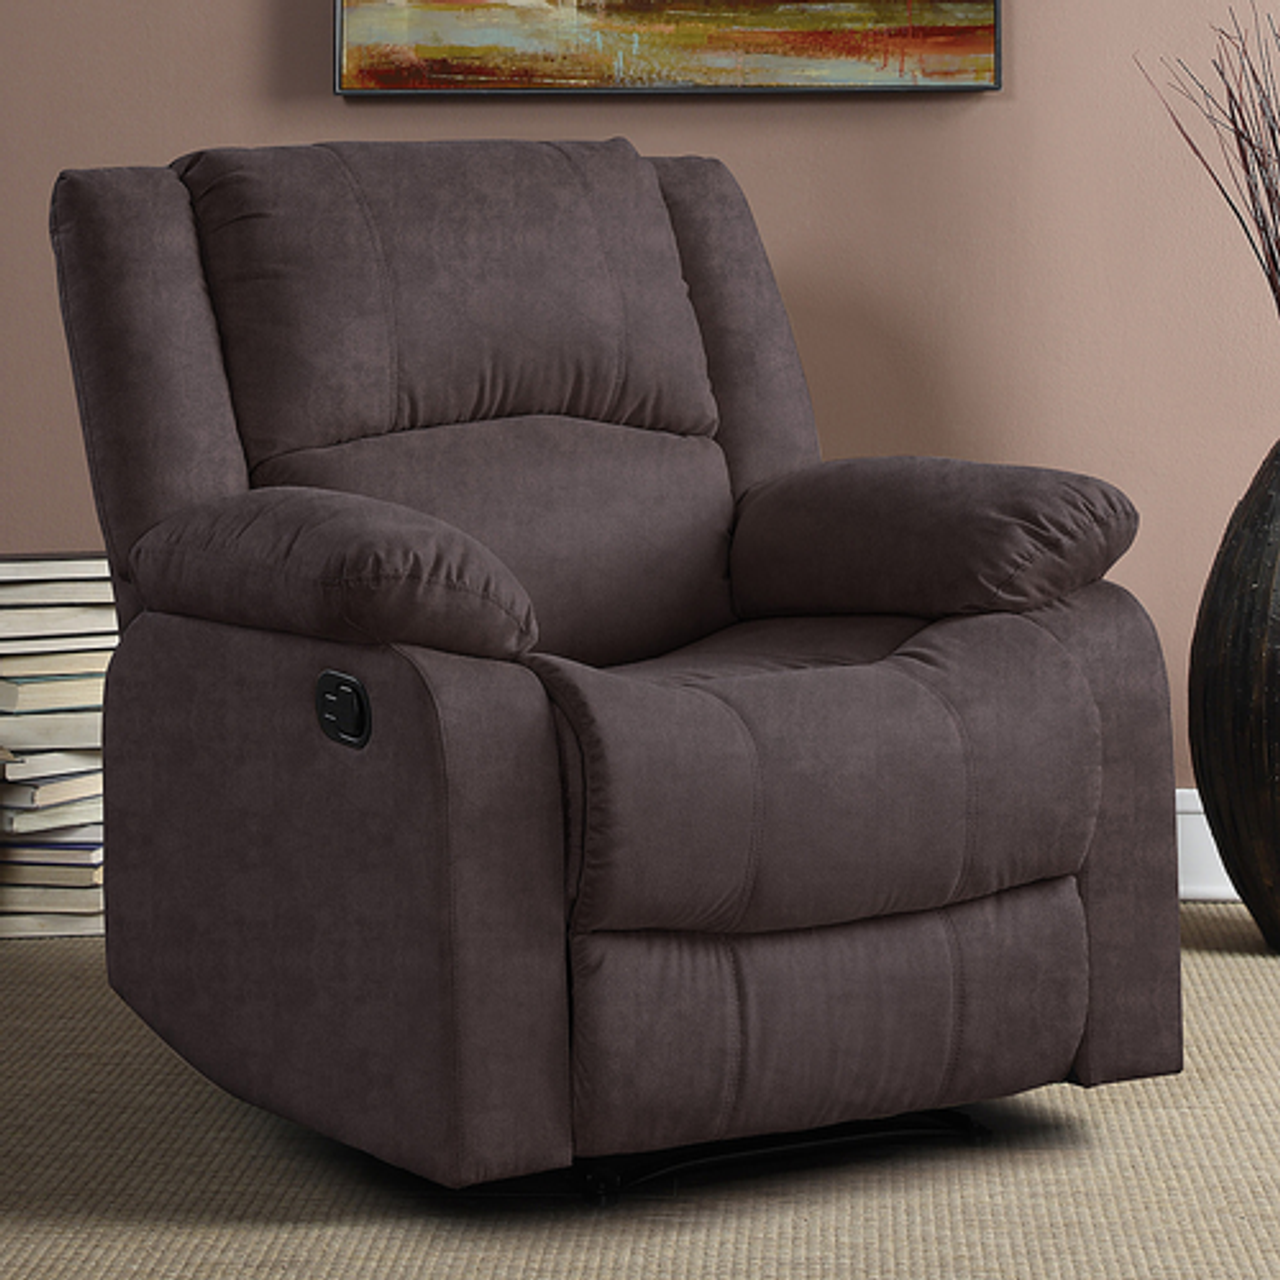 Relax A Lounger - Parkland Microfiber Recliner in - Chocolate